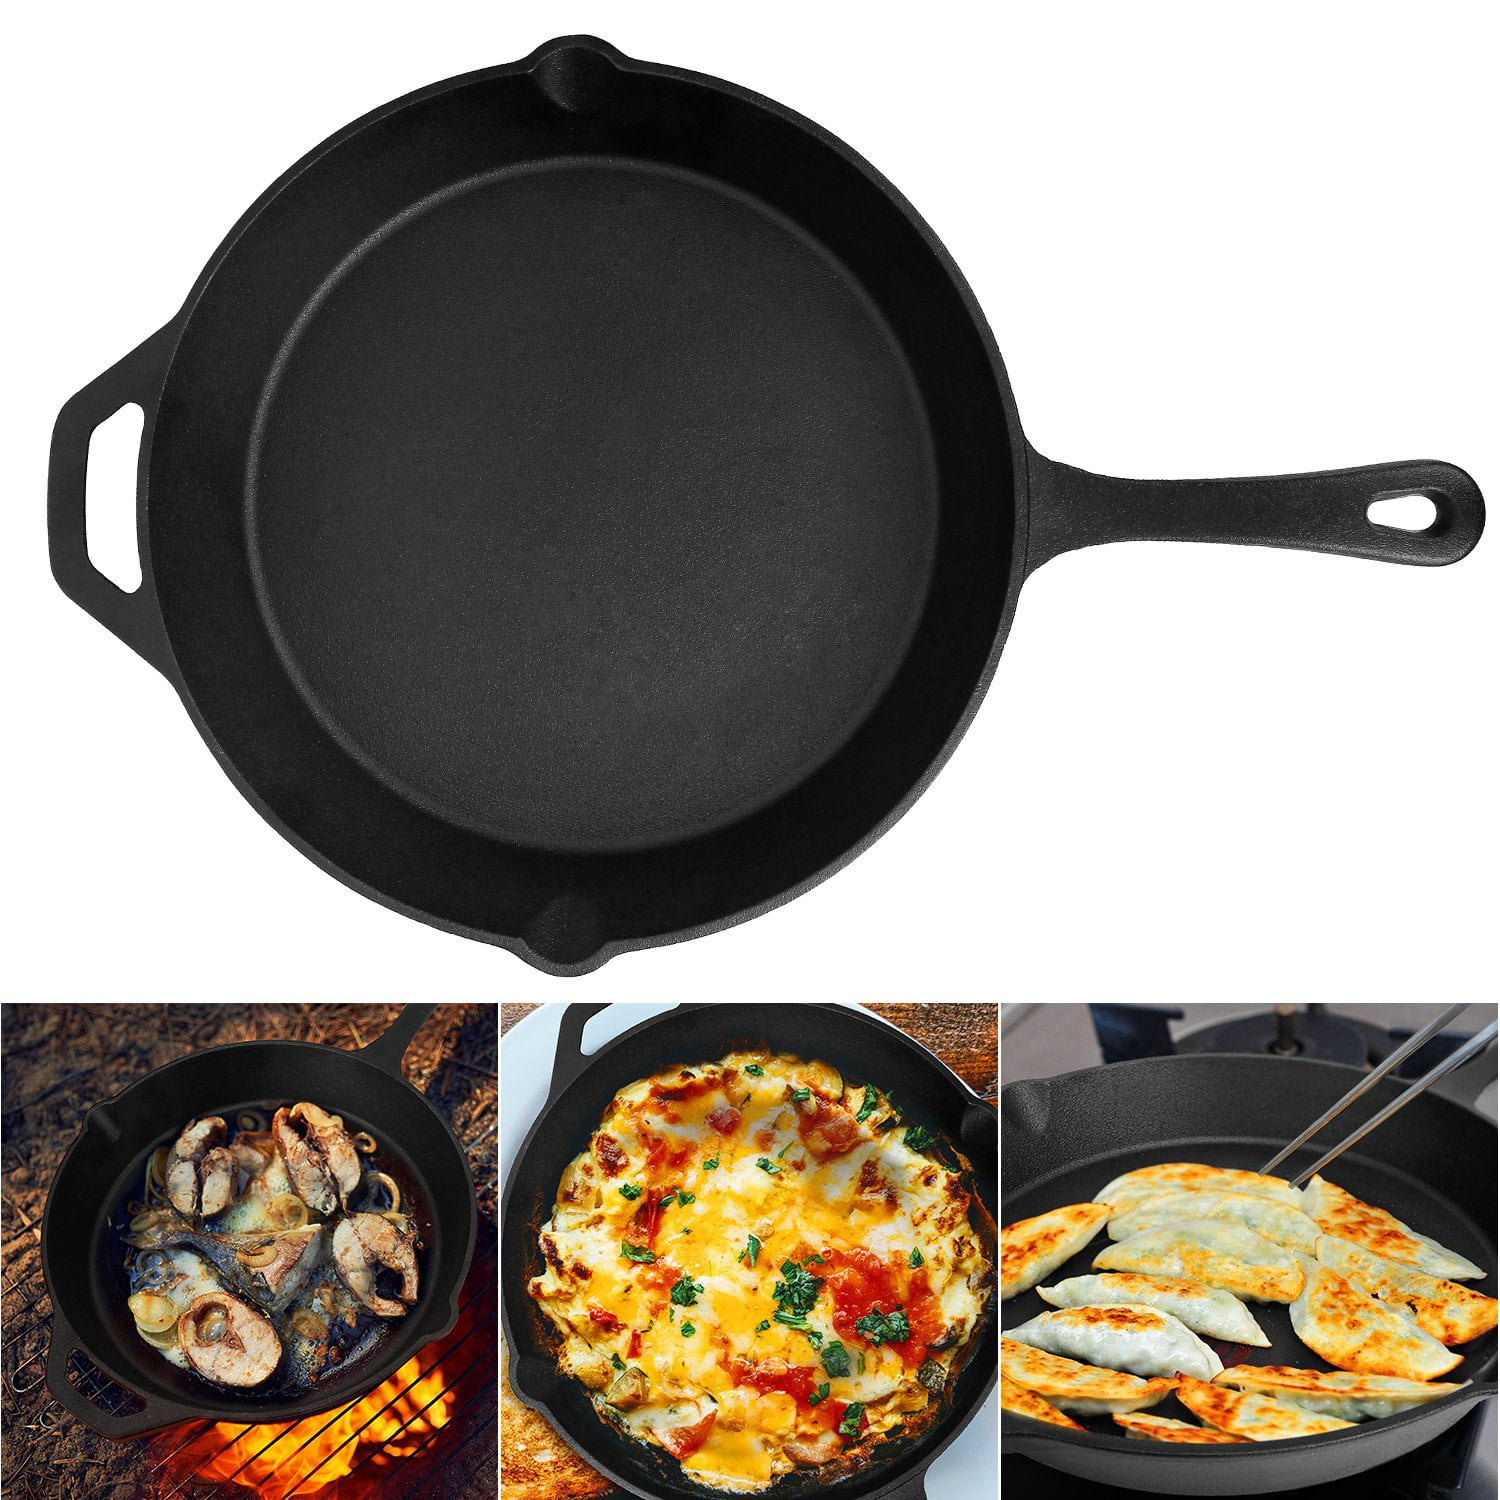 Thanks, Mail Carrier: Checking Our List #5: Xtrema Ceramic Cookware 3-Piece  10 Skillet Set {Review & Giveaway}